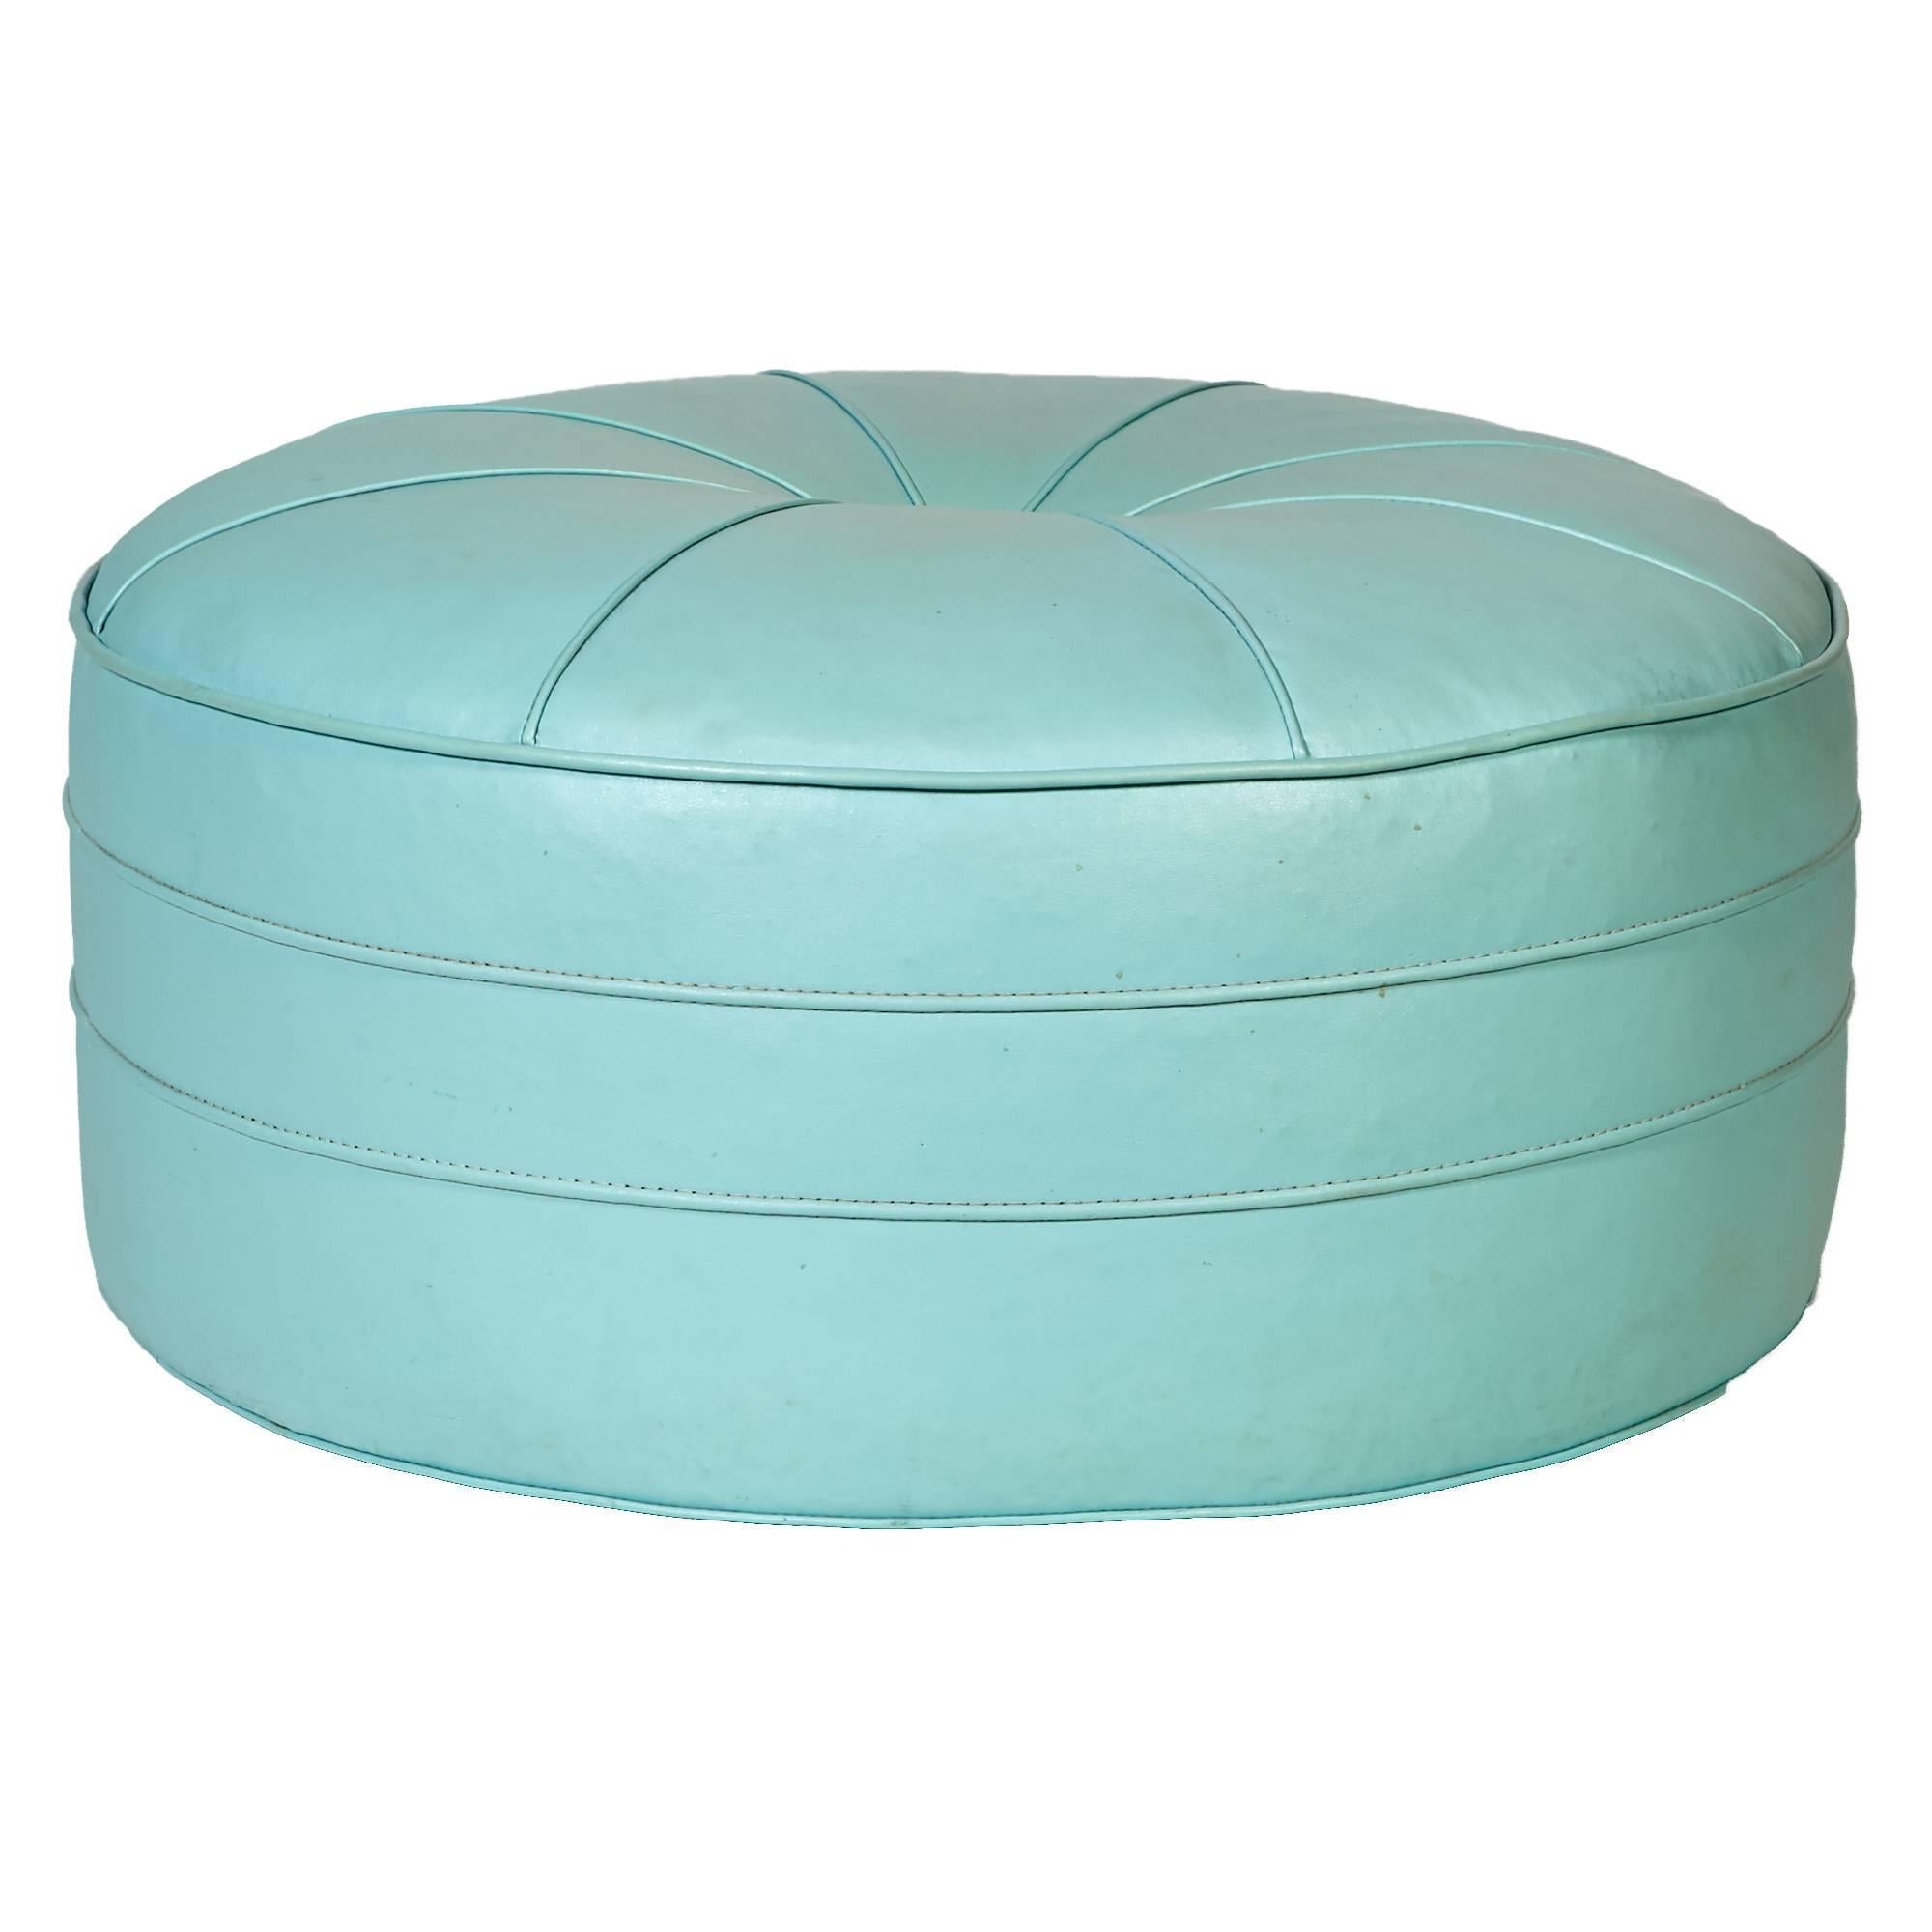 1960s Turquoise Over-Sized Round Pouf / Ottoman For Sale